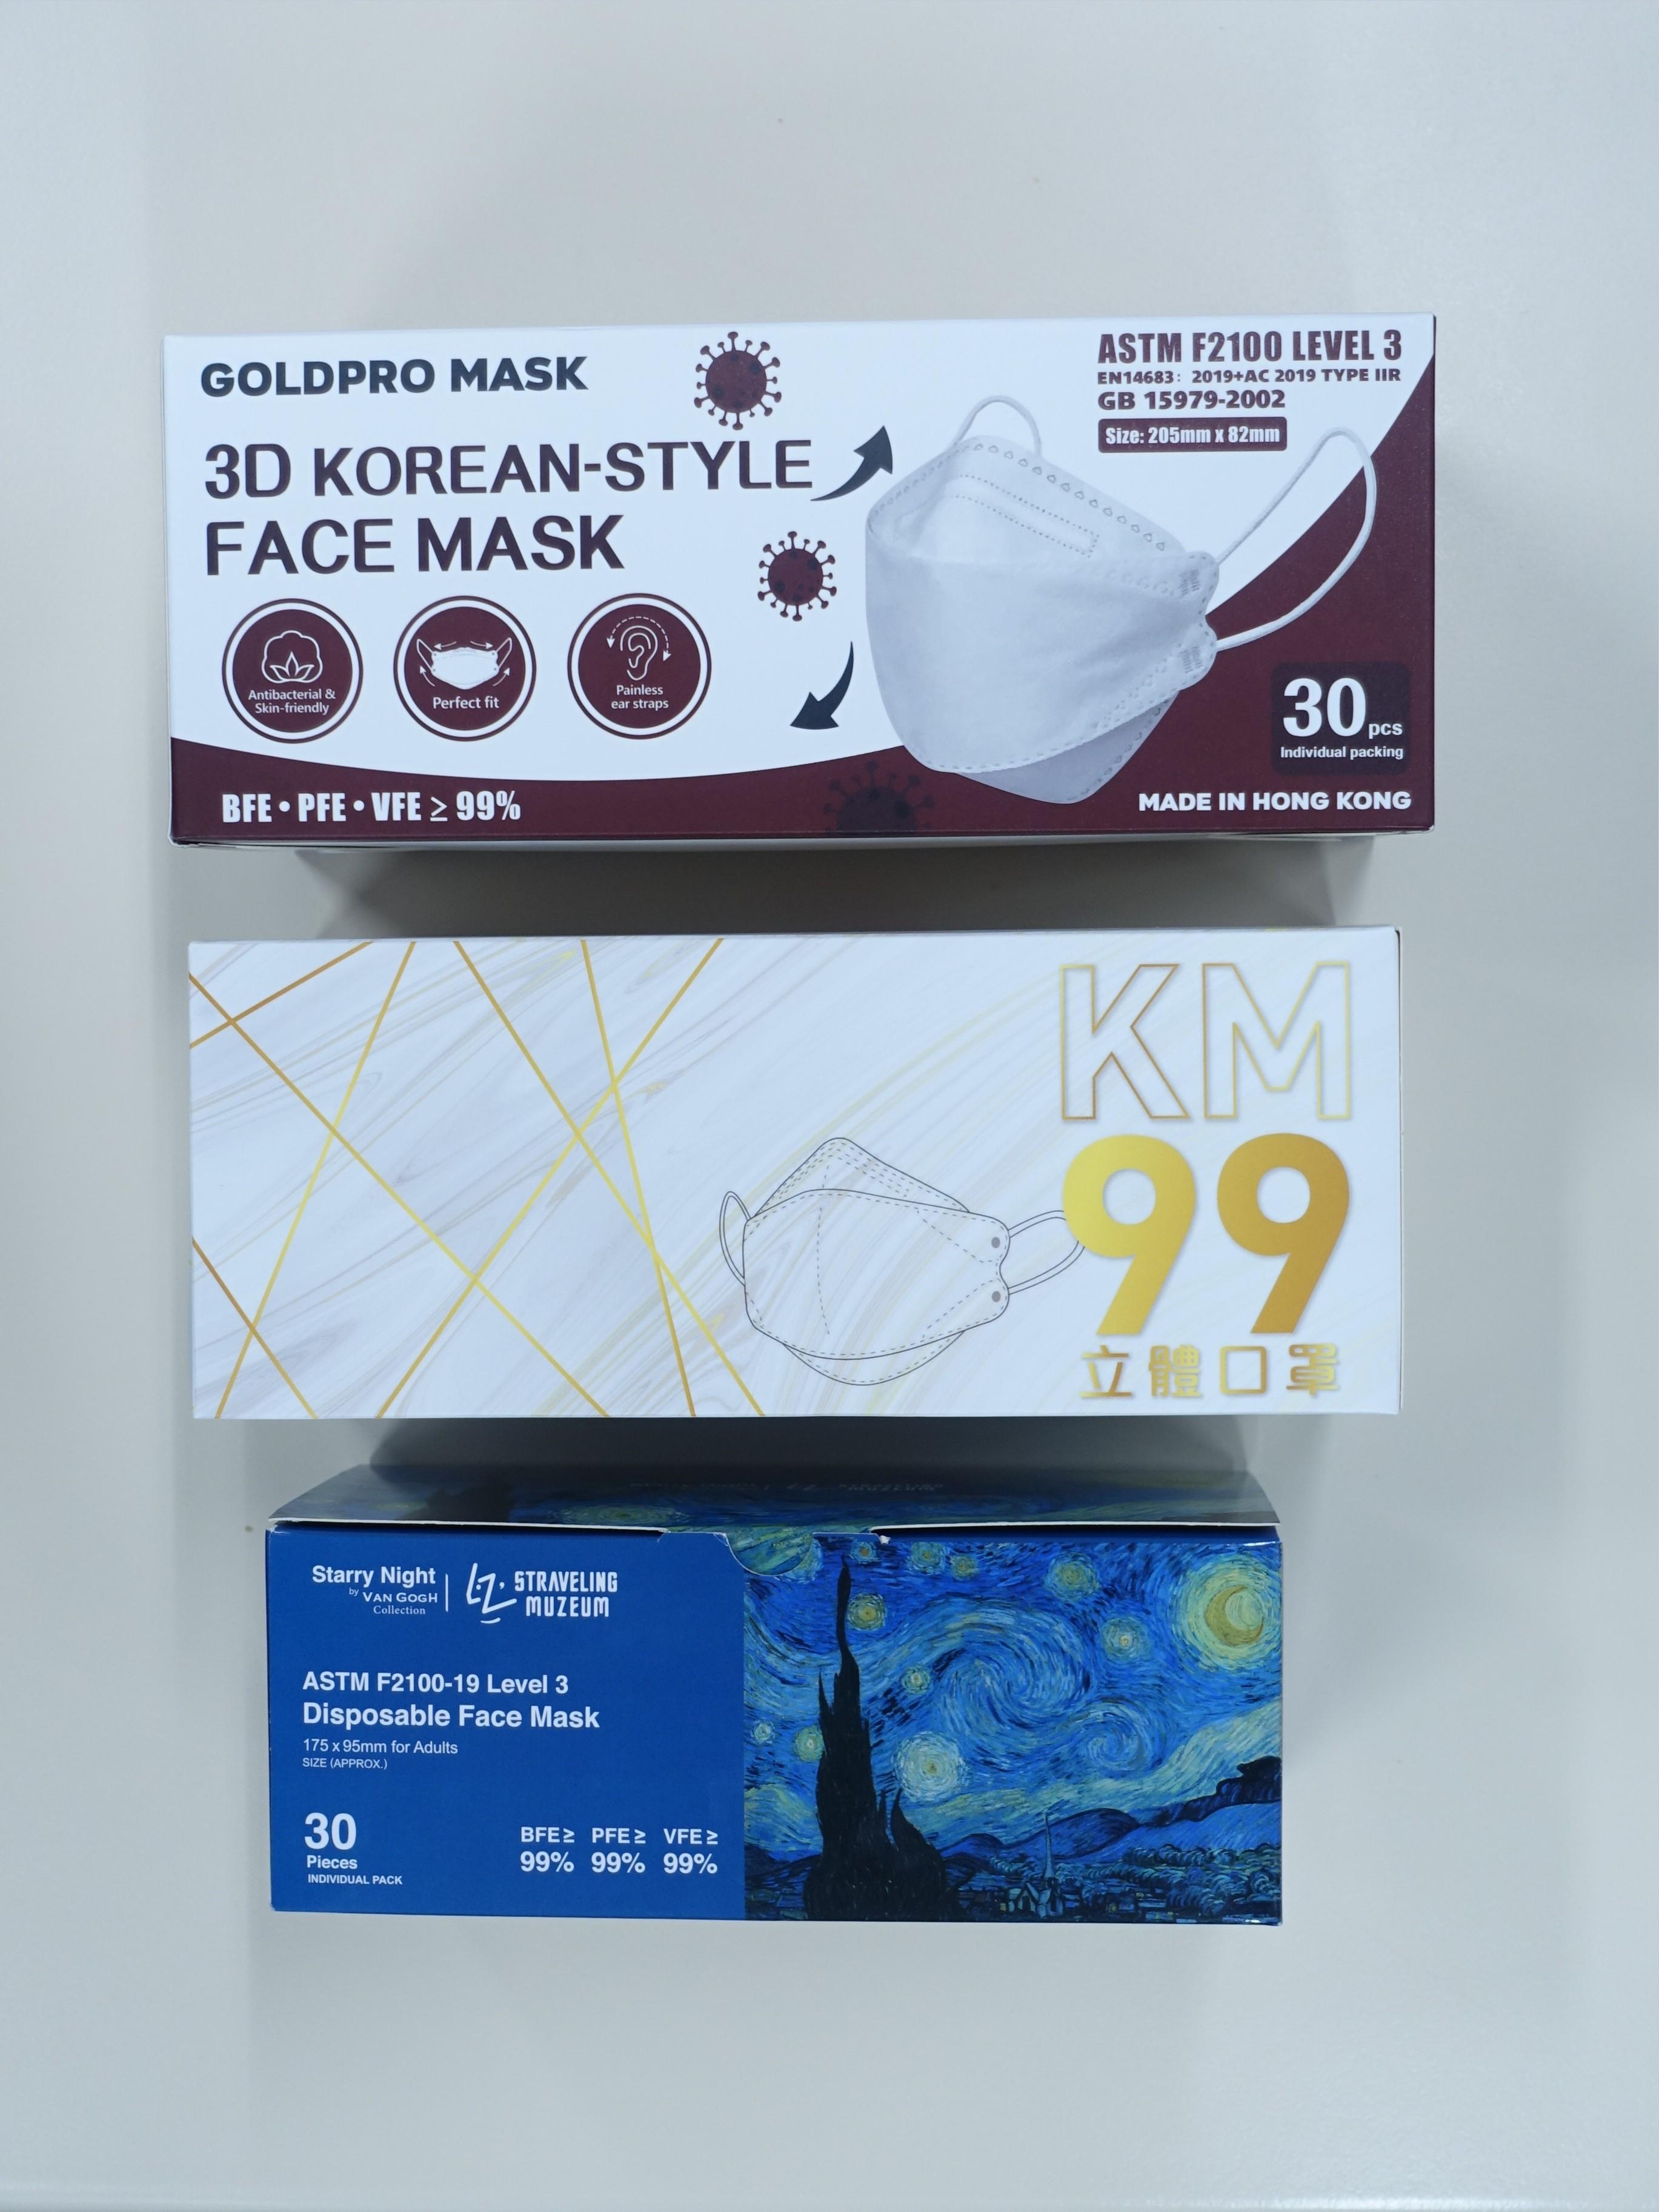 Hong Kong Customs mounted an enforcement operation against four face mask retailers and a face mask manufacturer suspected of selling and supplying face masks with false performance claims, in contravention of the Trade Descriptions Ordinance, from November 23 to December 6. Photo shows three types of face masks claiming to meeting the differential pressure requirement of a certain performance standard, which was inconsistent with the facts.